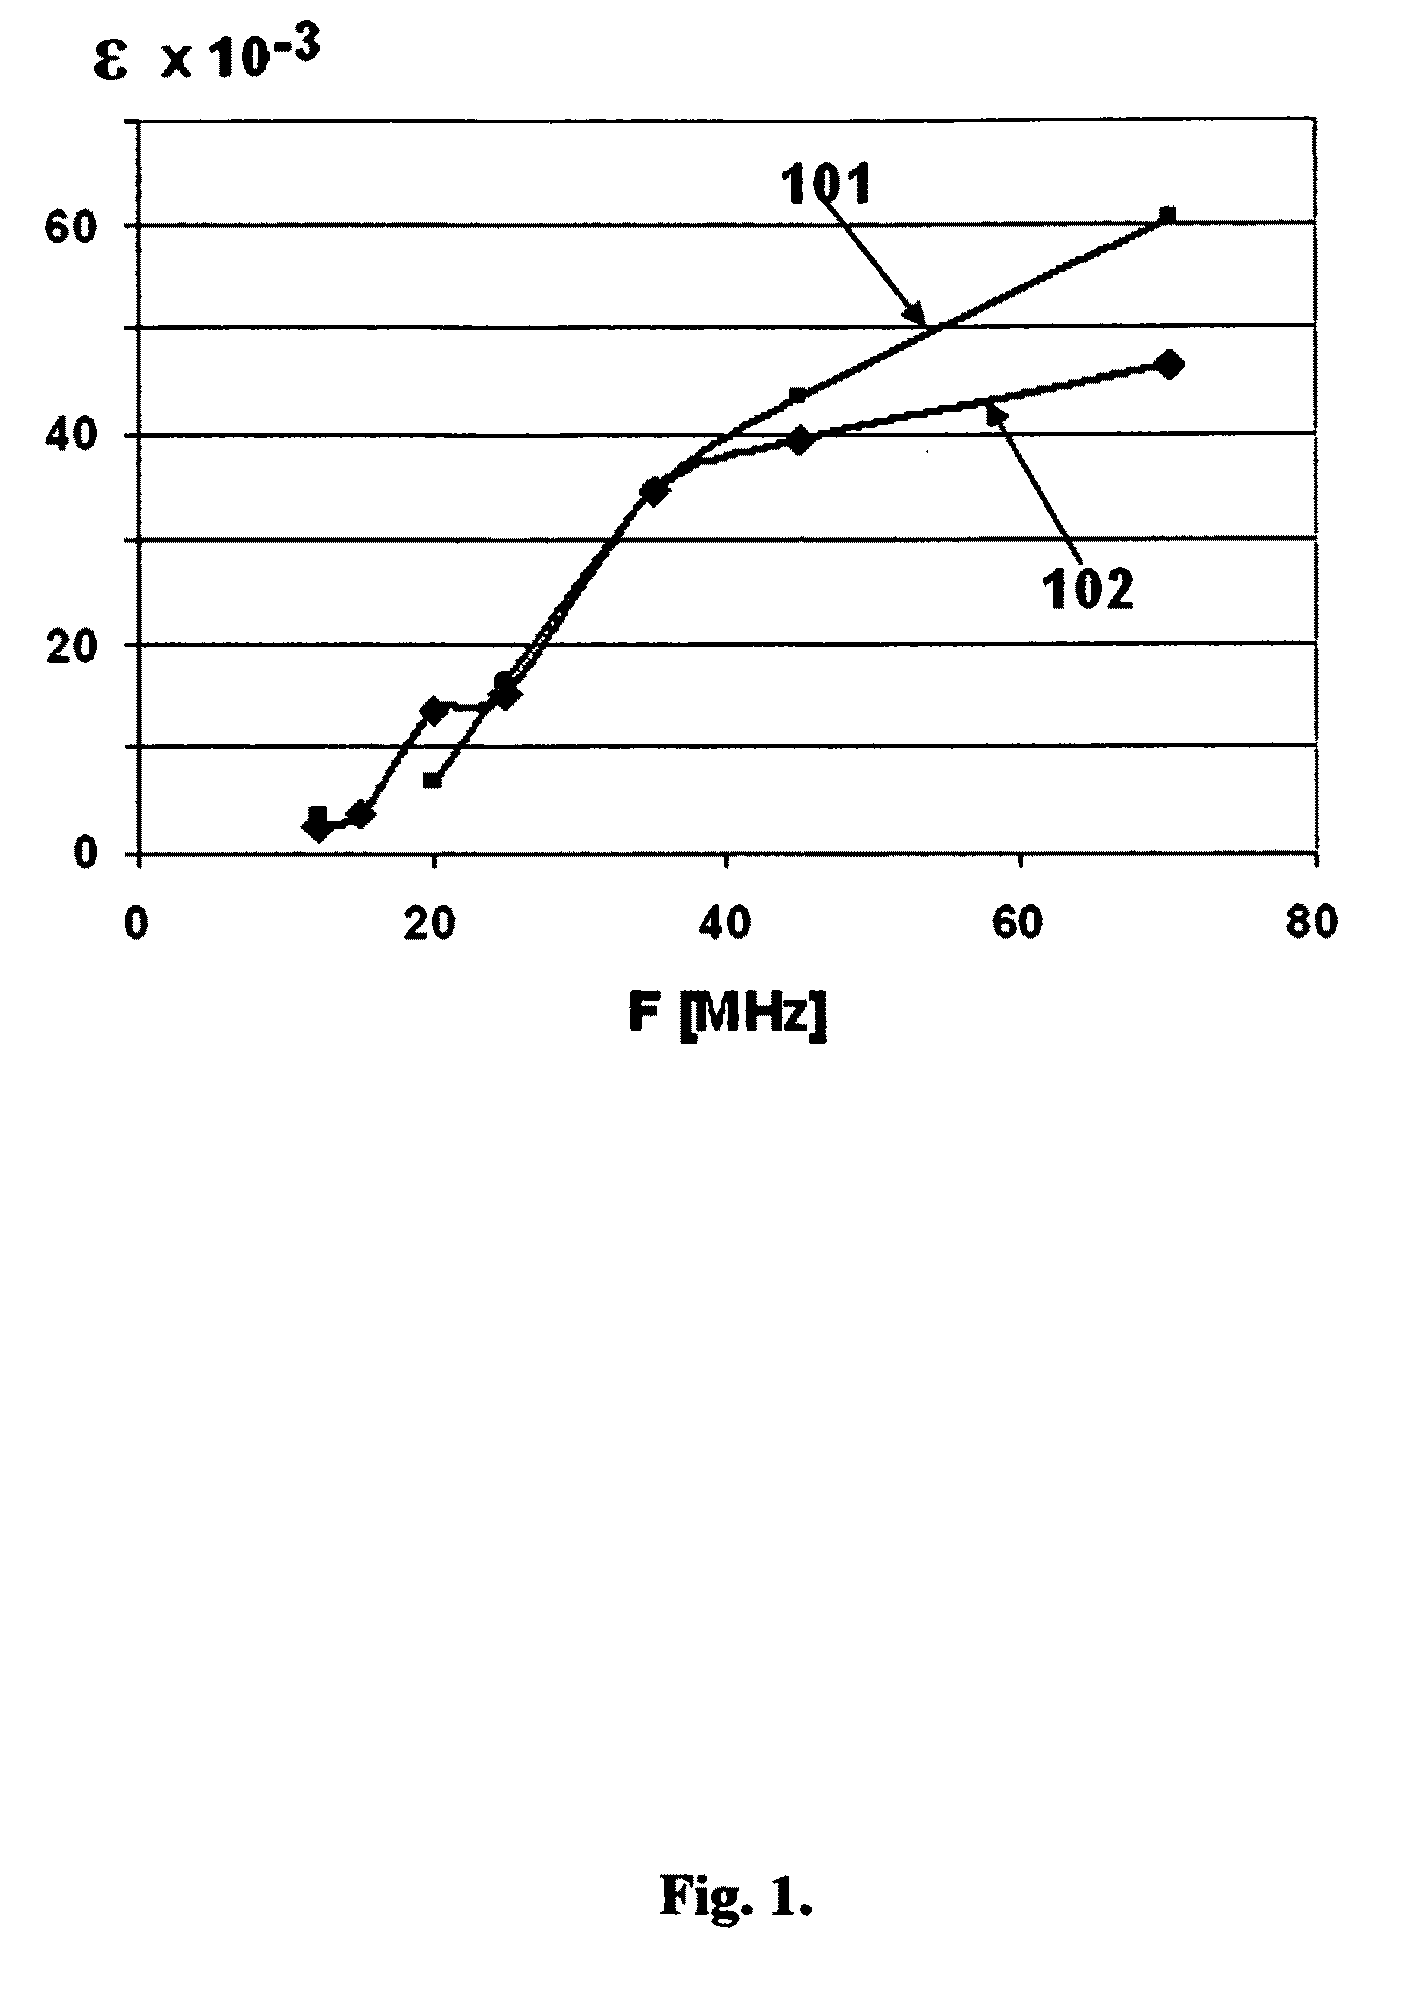 Method and device for rapid non-destructive quality control of powdered materials